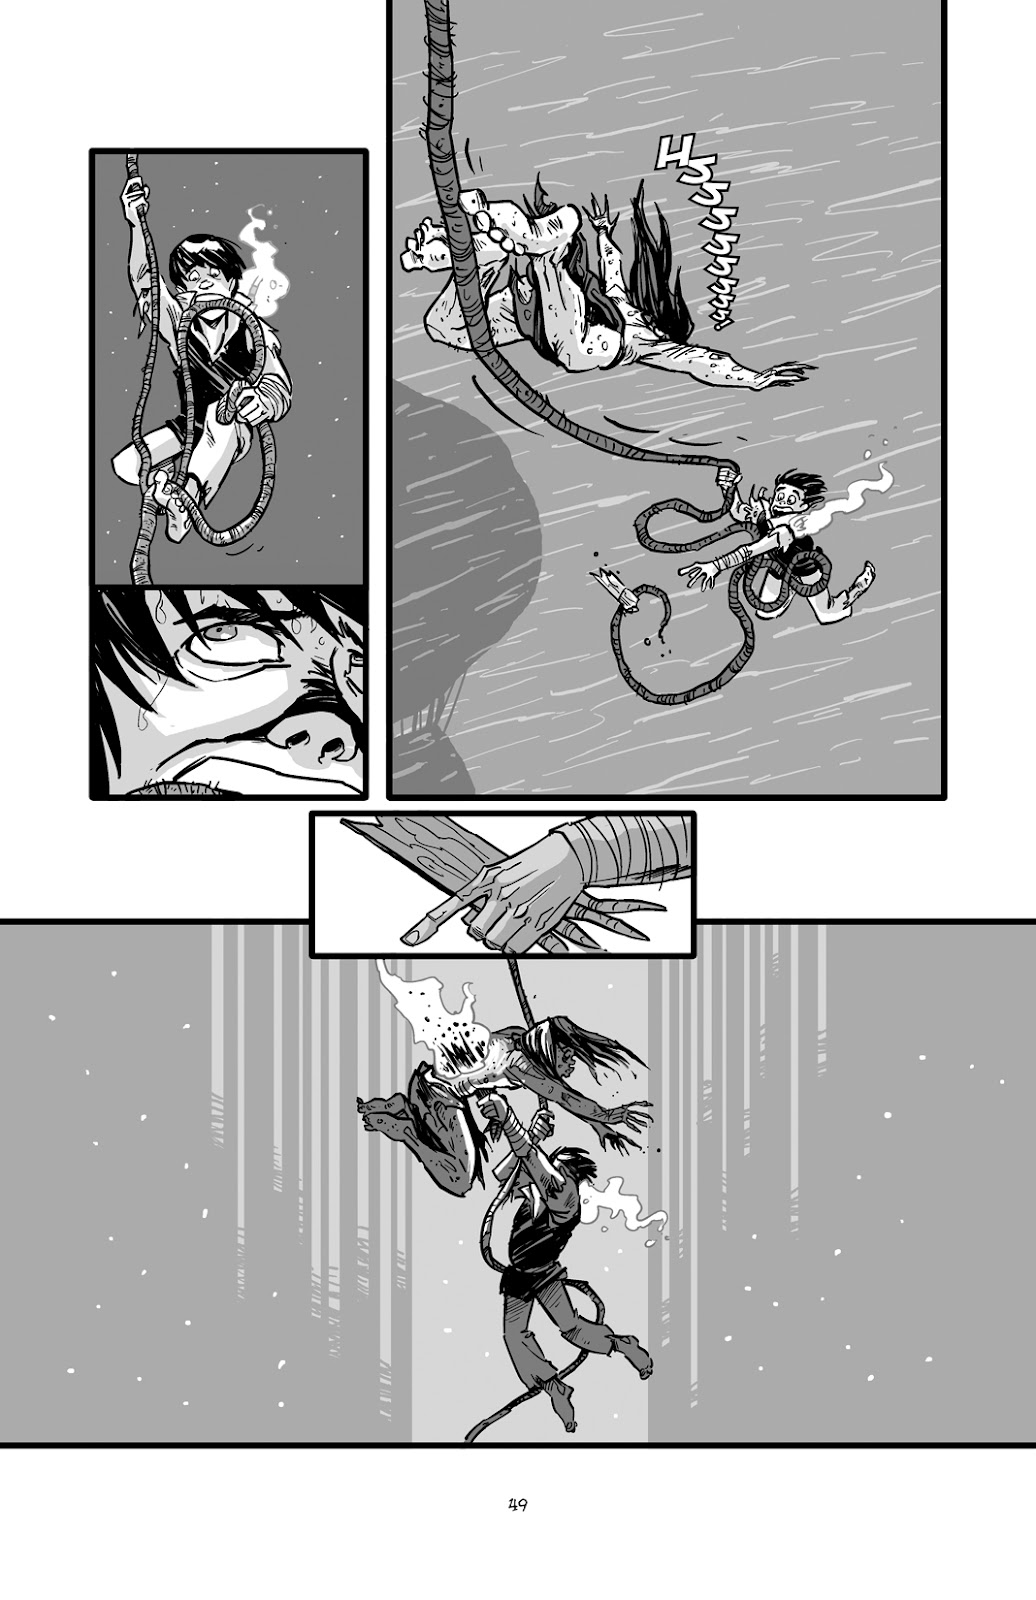 Pinocchio: Vampire Slayer - Of Wood and Blood issue 2 - Page 23